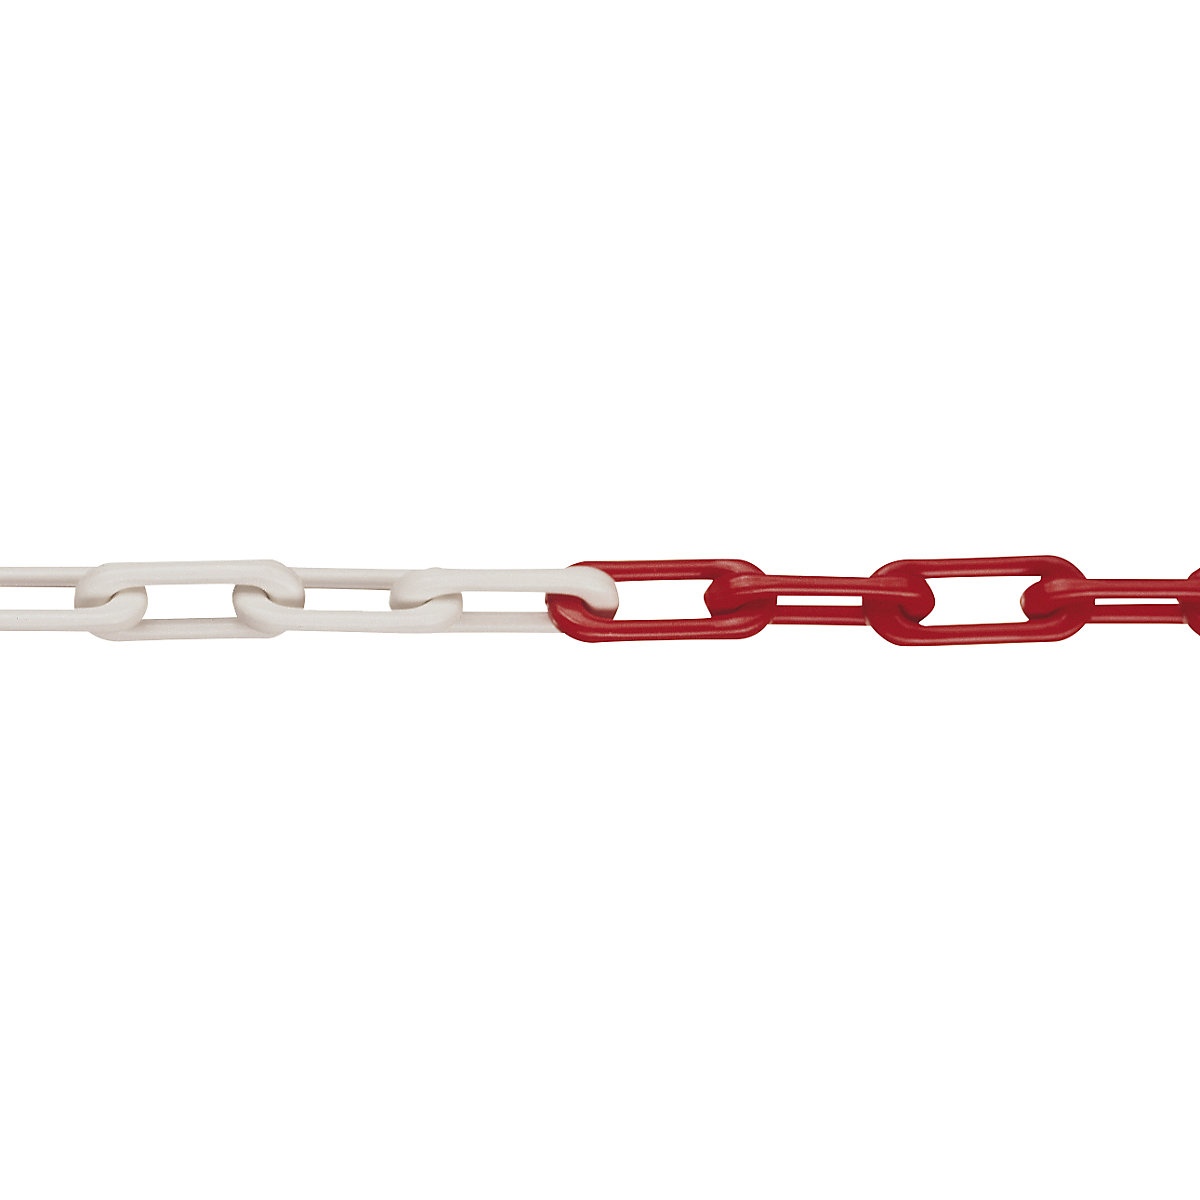 Nylon chain, MNK quality standard 6, band length 50 m, red/white, 4+ items-4